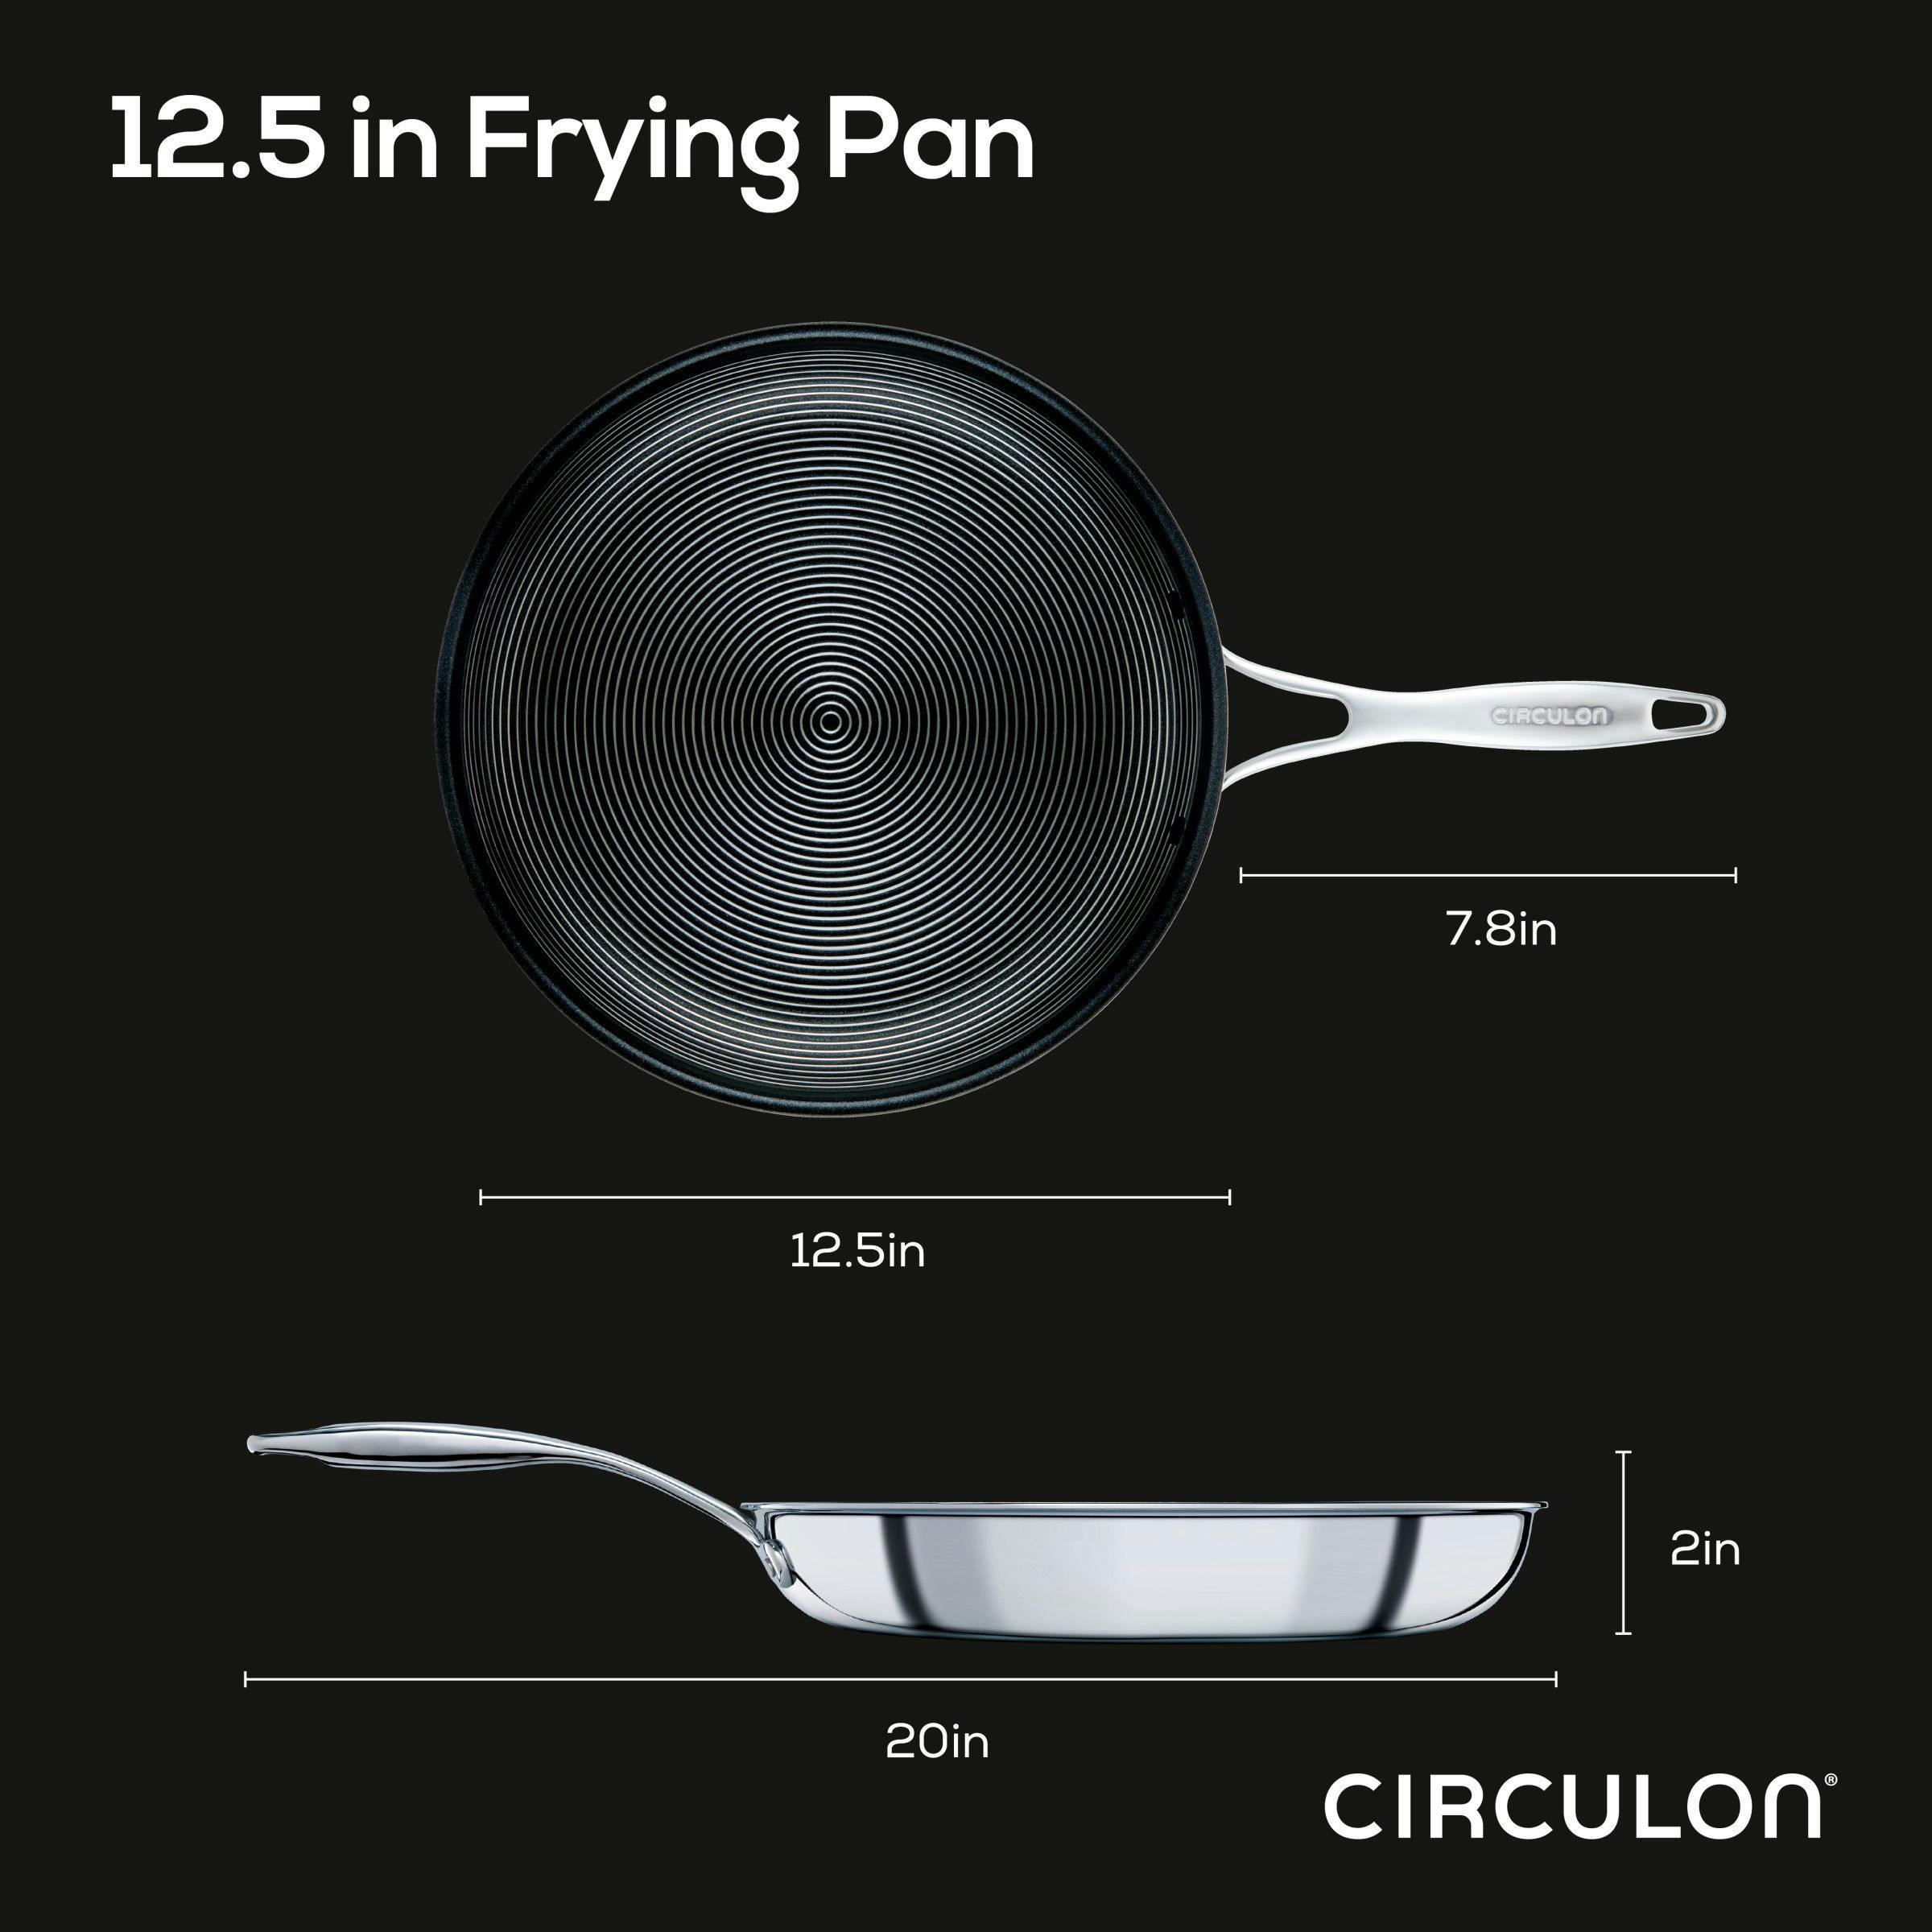 Circulon Clad Stainless Steel Induction Frying Pan with Hybrid SteelShield and Nonstick Technology, 12.5-Inch, Silver